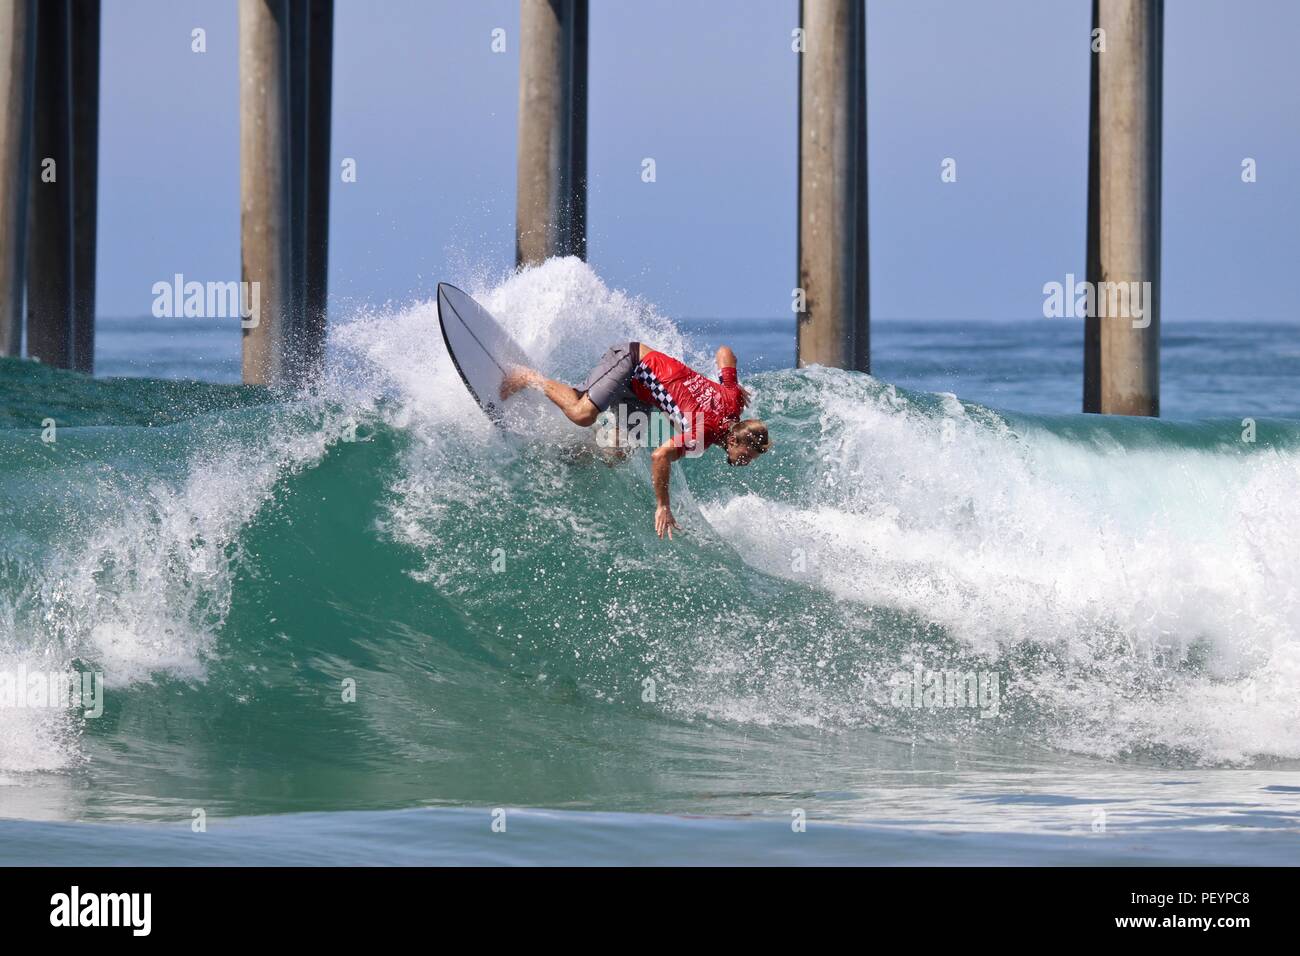 Nomme Mignot competere nel US Open di surf 2018 Foto Stock